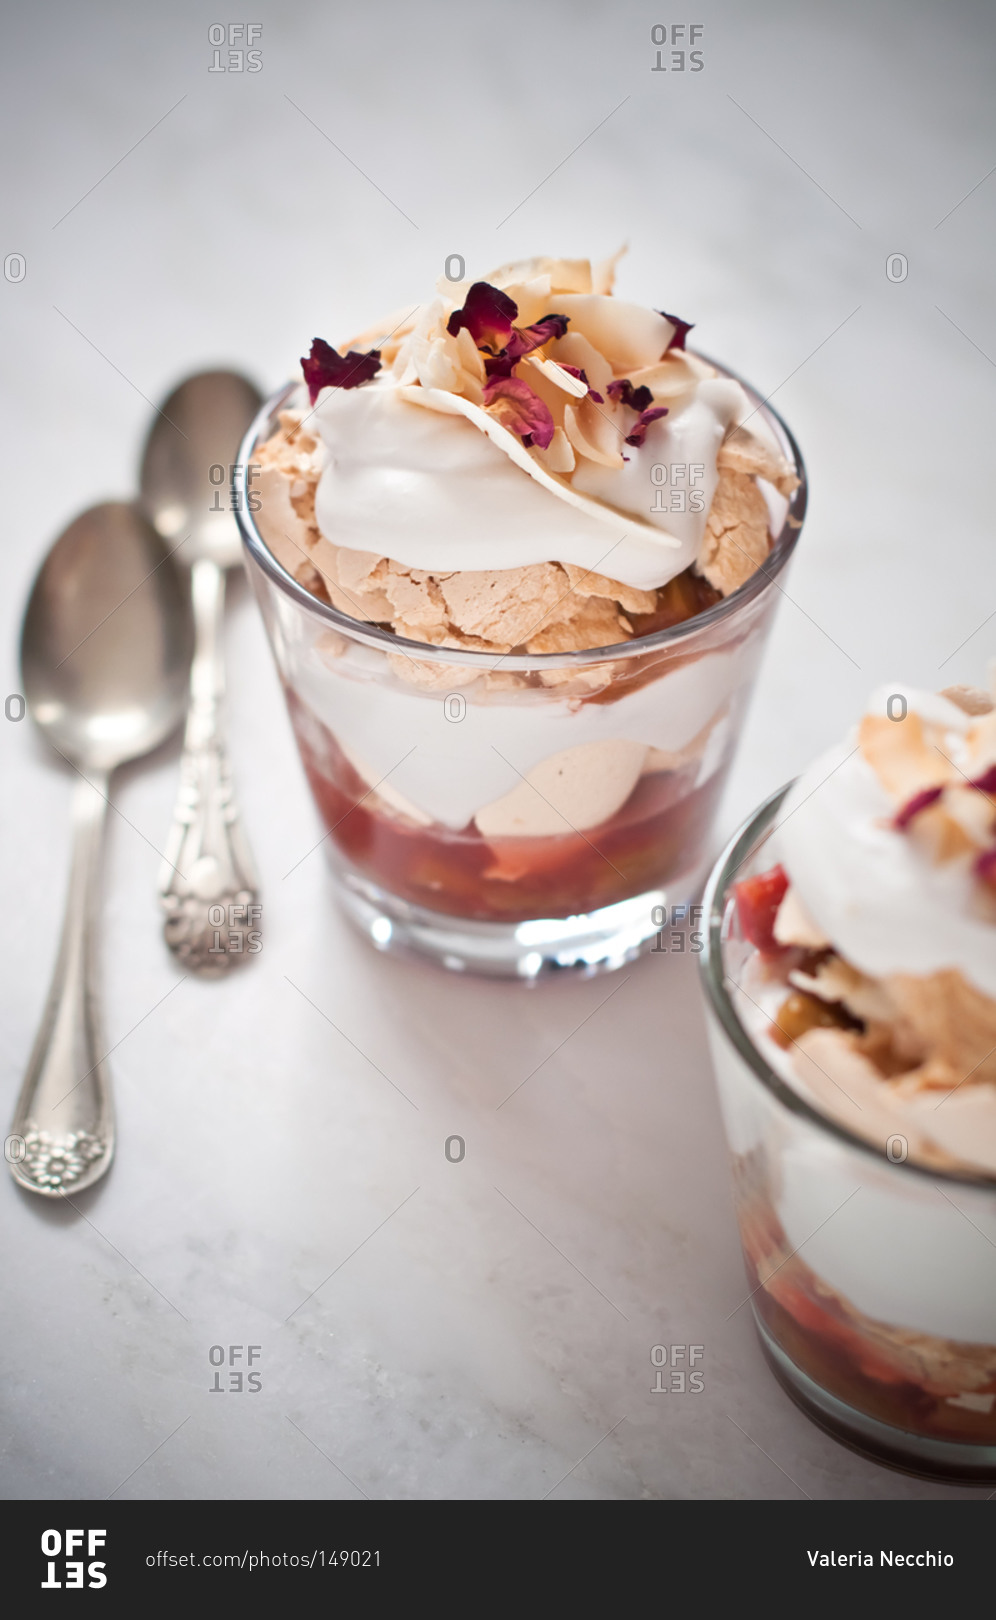 Two portions of a creamy dessert of coconut, crumbly meringue and rhubarb with rose petals